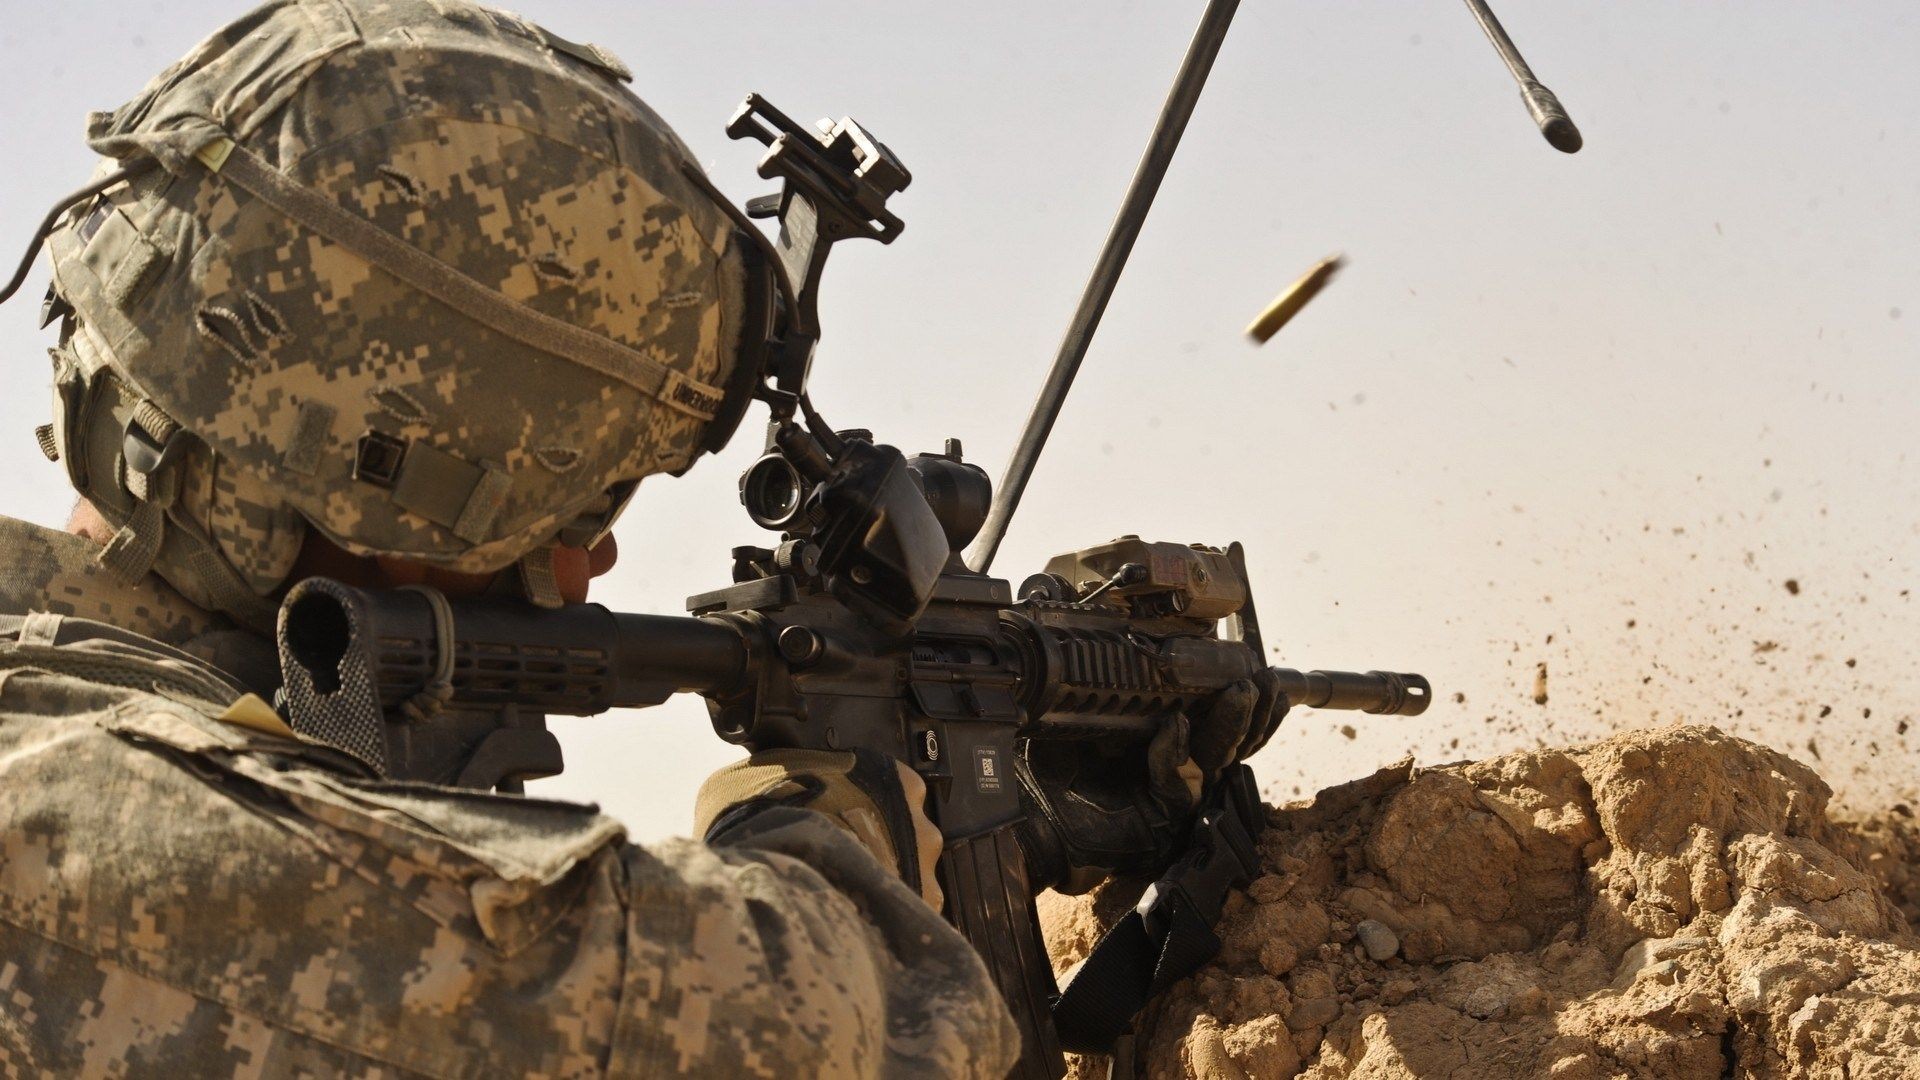 1920x1080 1920x1200 Us Infantry Full HD Wallpaper and Background Image | 1920x1200 |  ID ...">